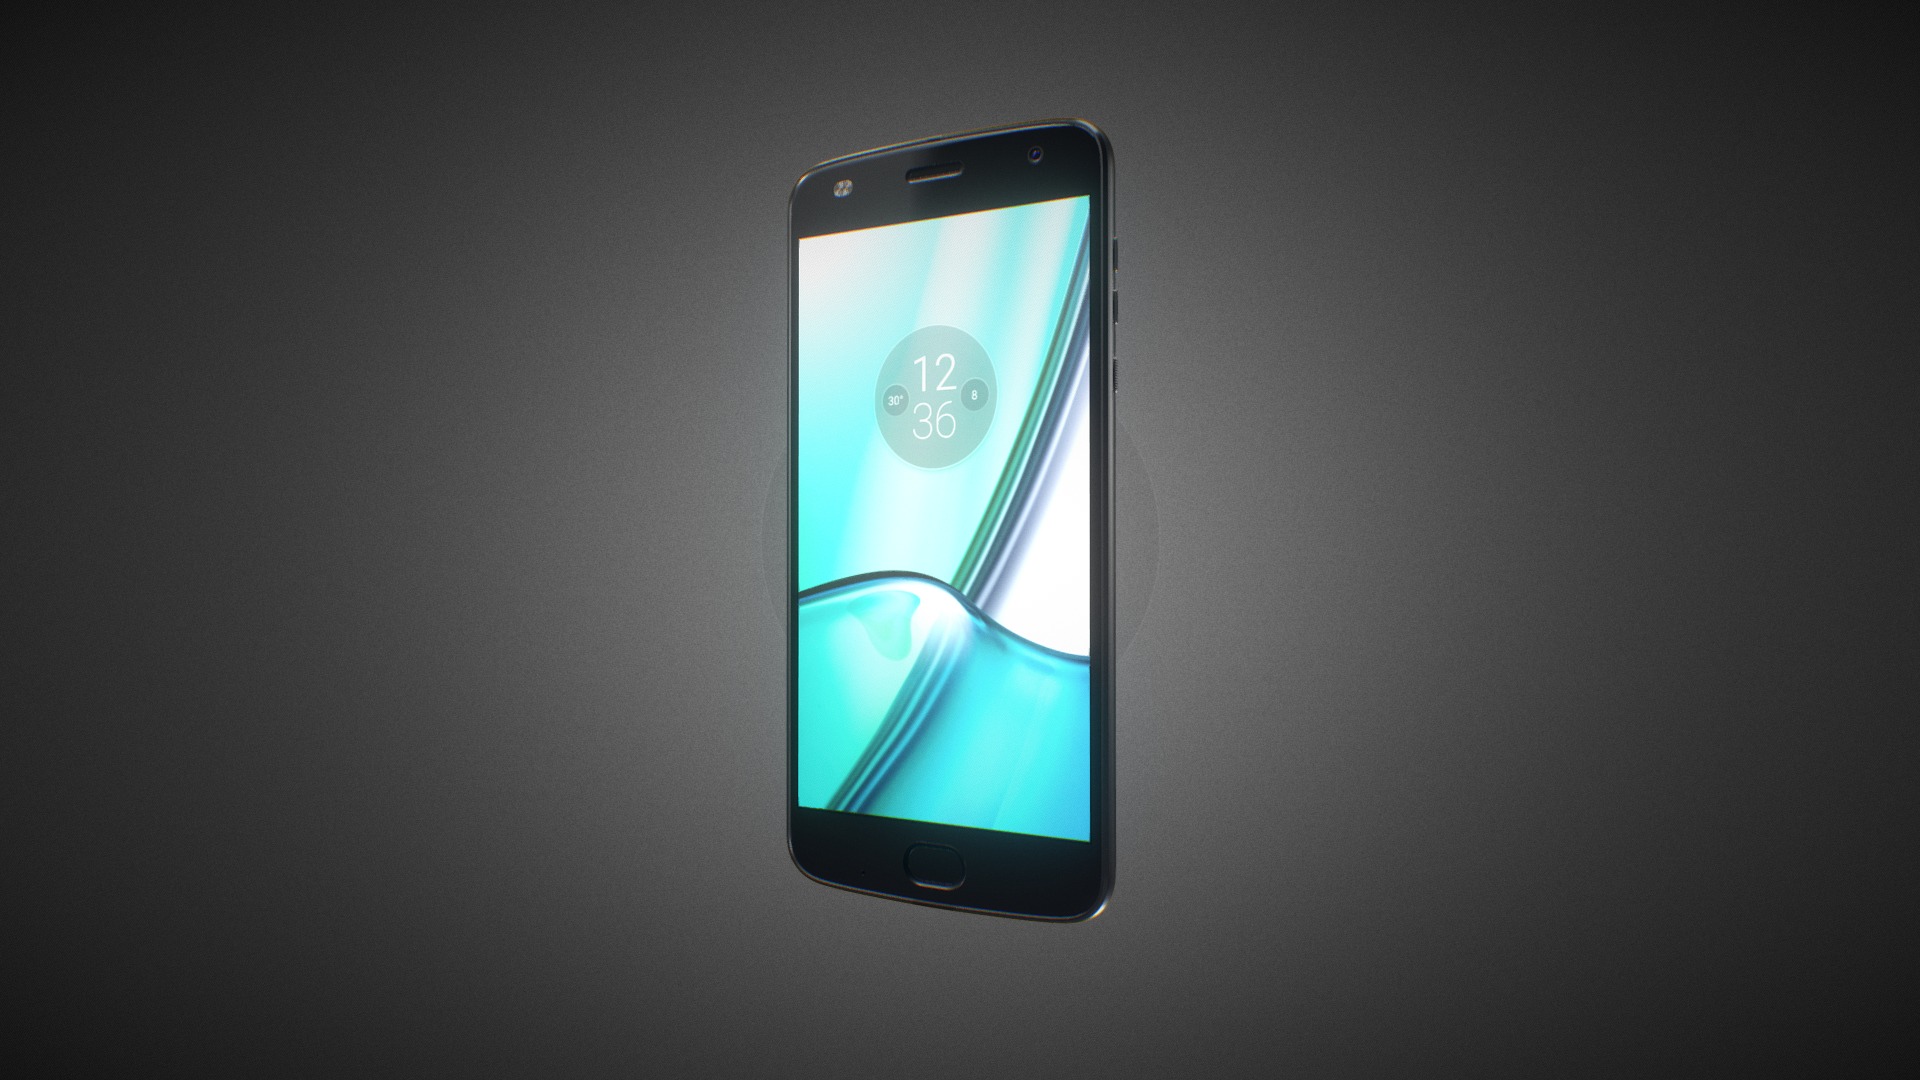 3D model Motorola Moto Z2 Play for Element 3D - This is a 3D model of the Motorola Moto Z2 Play for Element 3D. The 3D model is about a cell phone with a blue light.